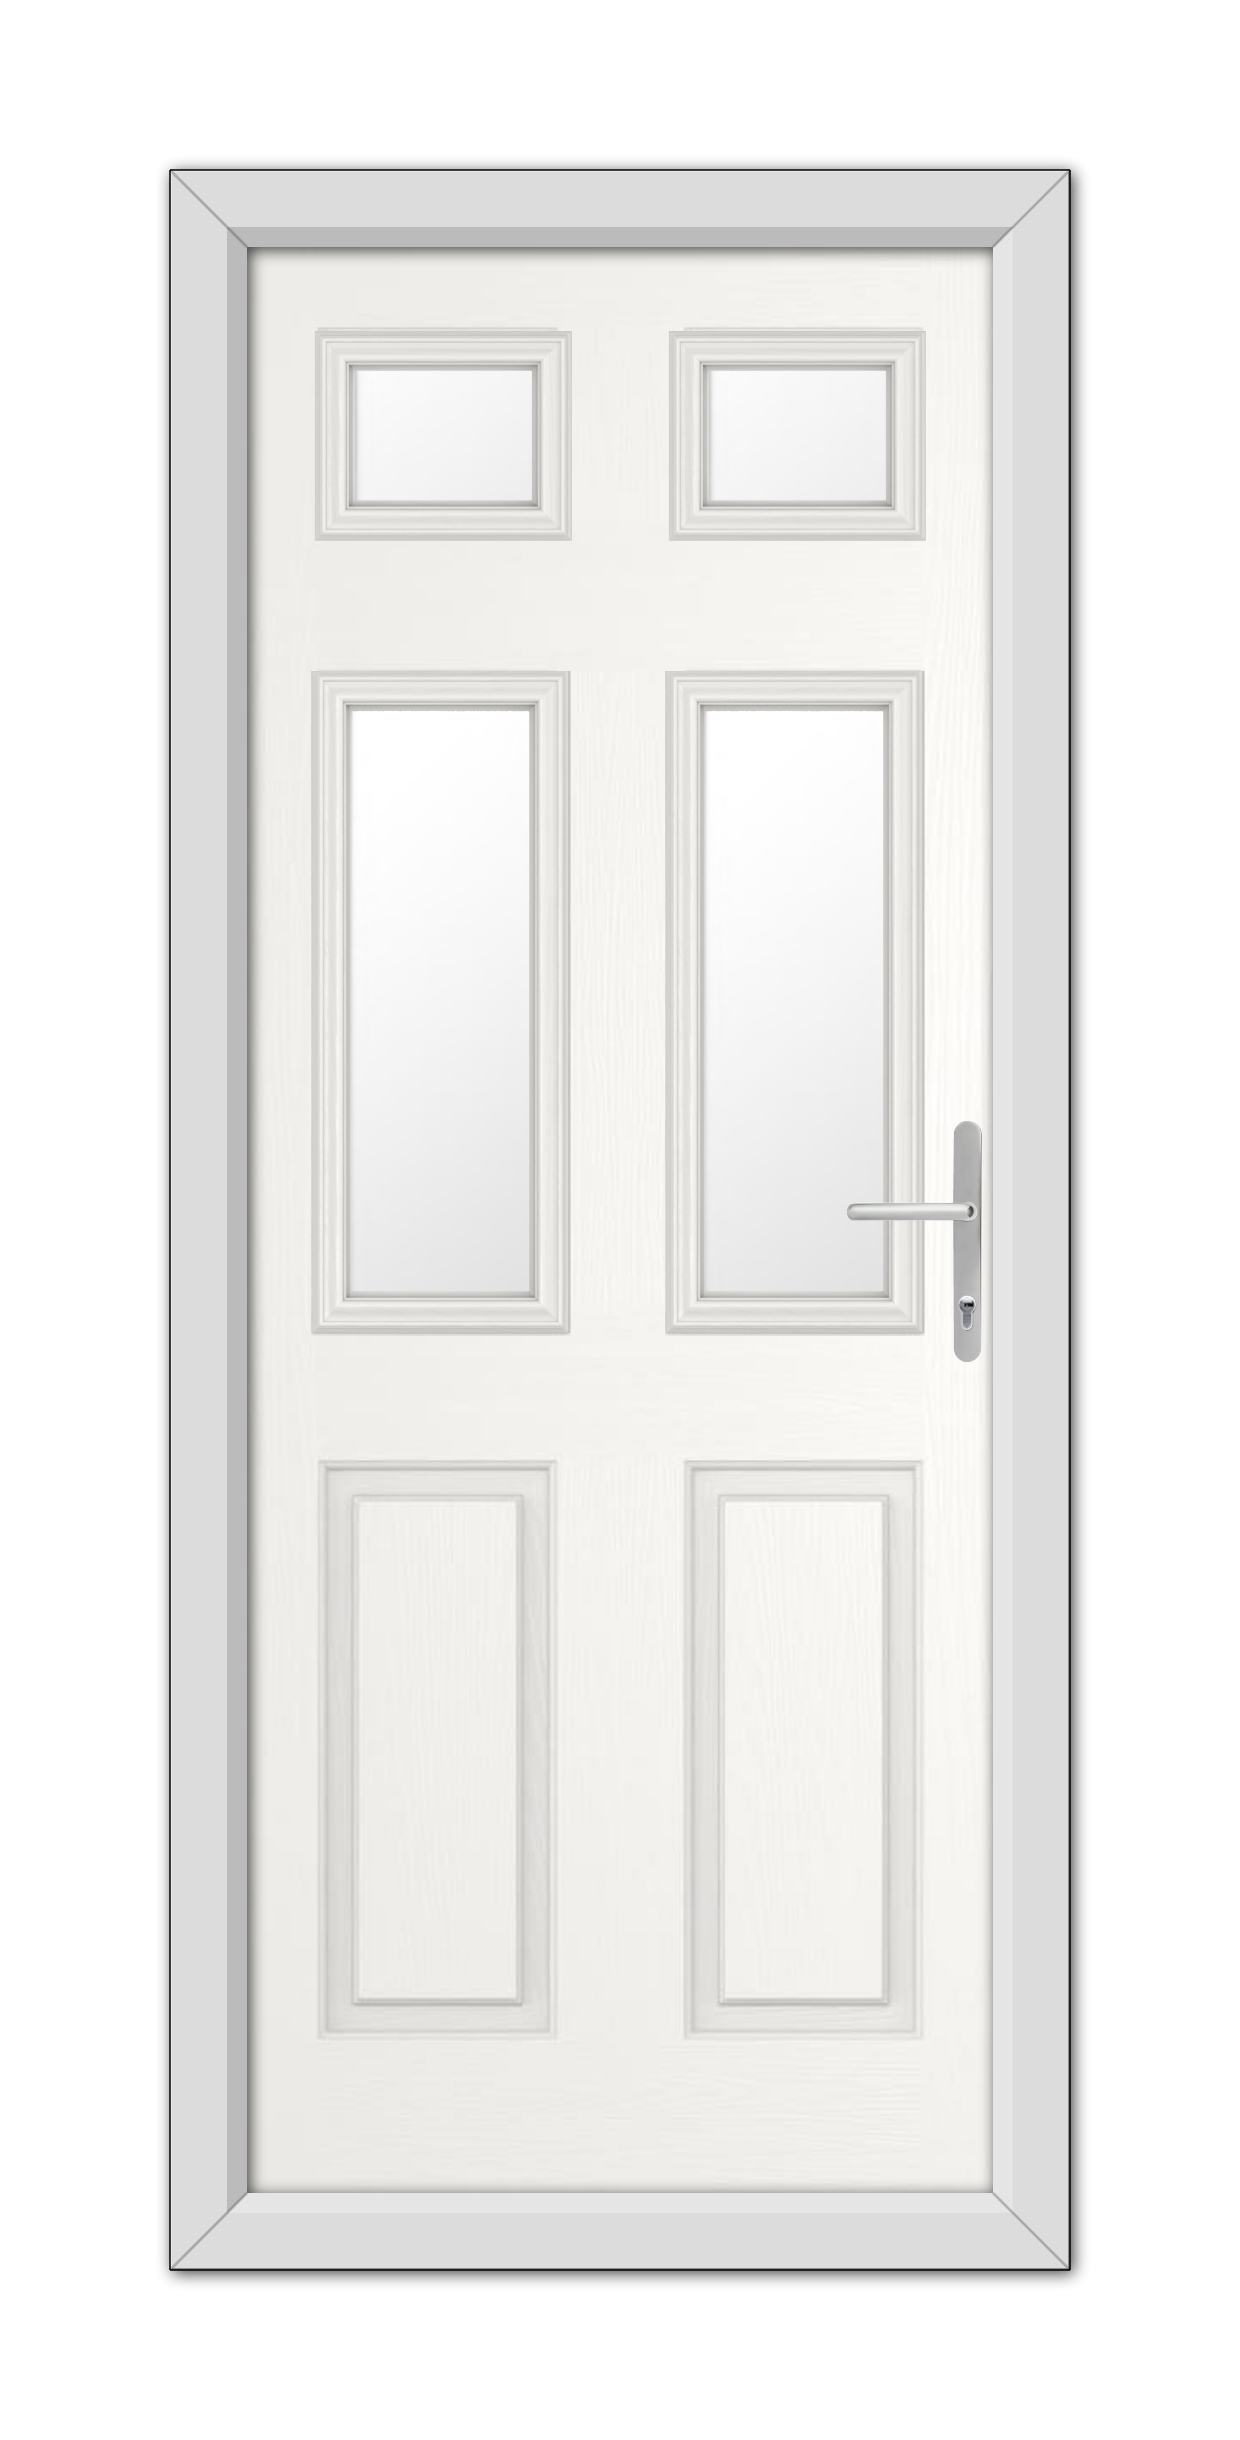 A White Middleton Glazed 4 Composite Door 48mm Timber Core with six panels and a modern silver handle, enclosed in a simple frame, viewed head-on.